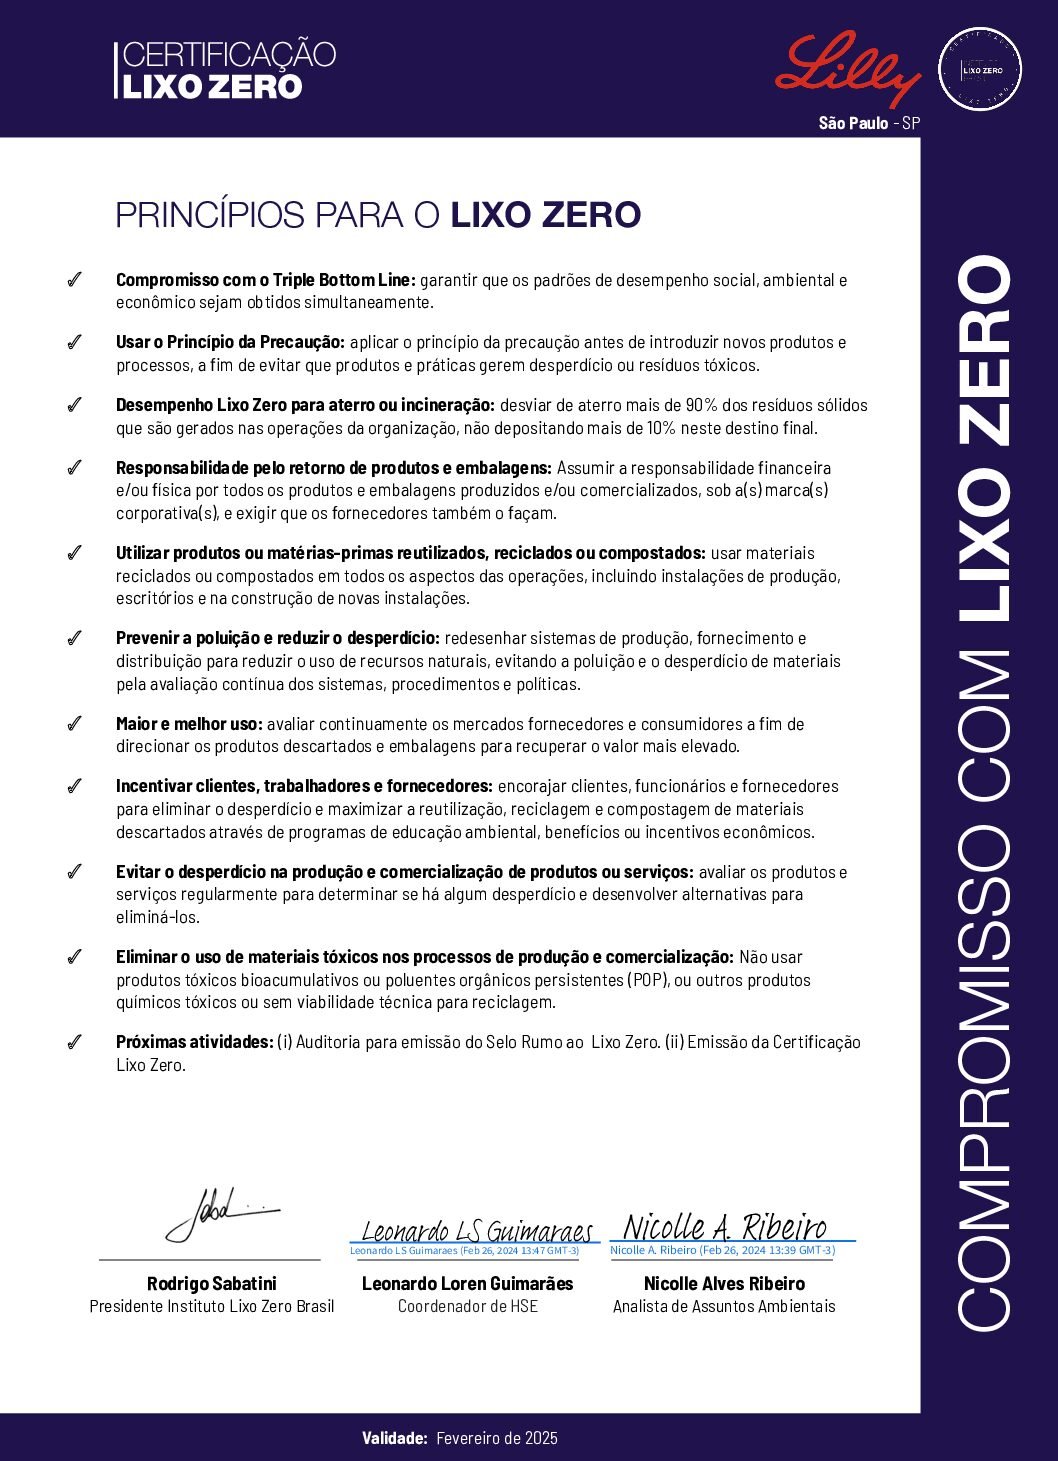 Compromisso lixo zero signed Lilly